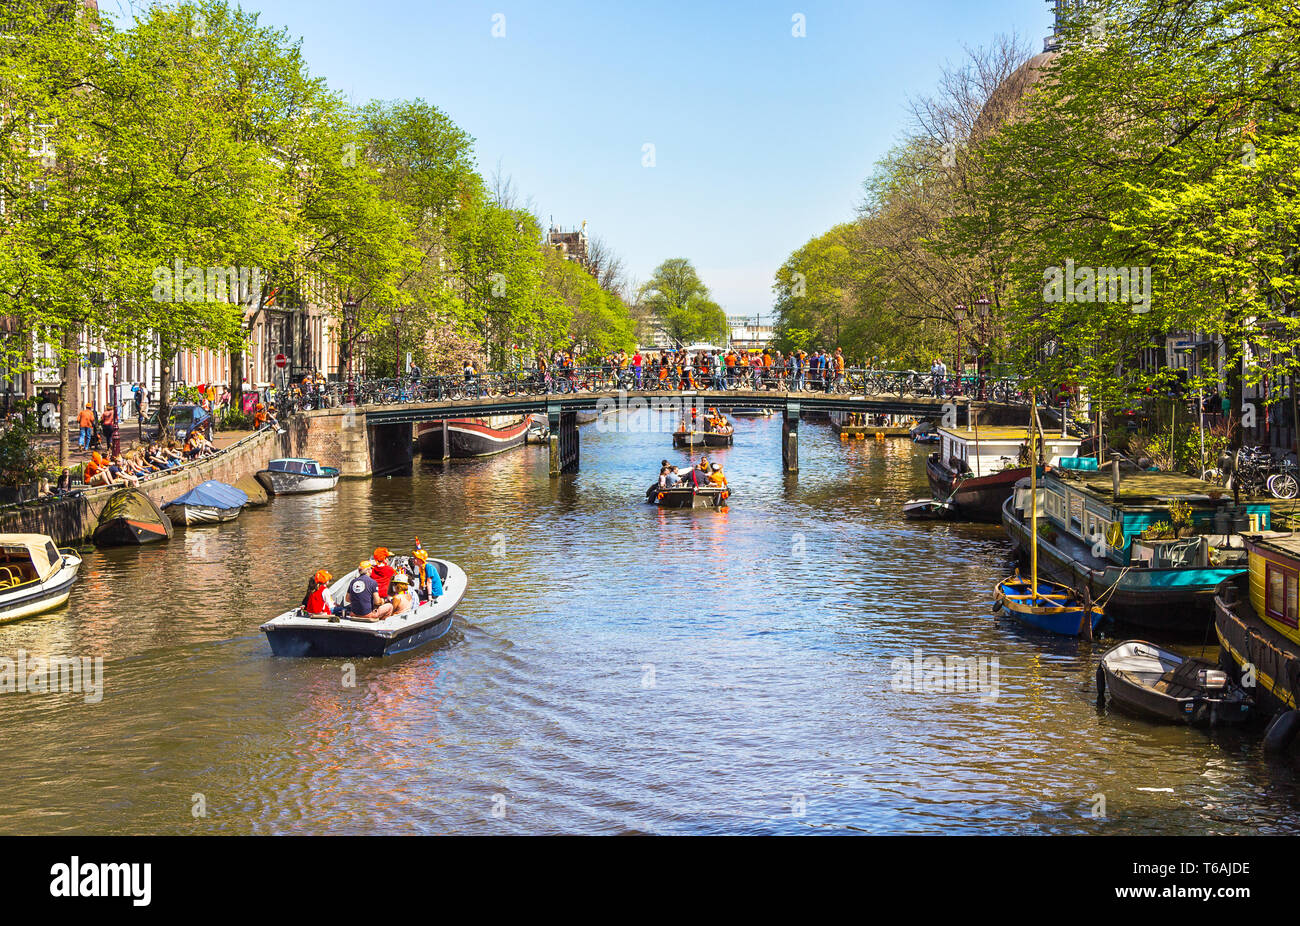 Celebration of queensday on April 30, 2012 in Amsterdam. Stock Photo